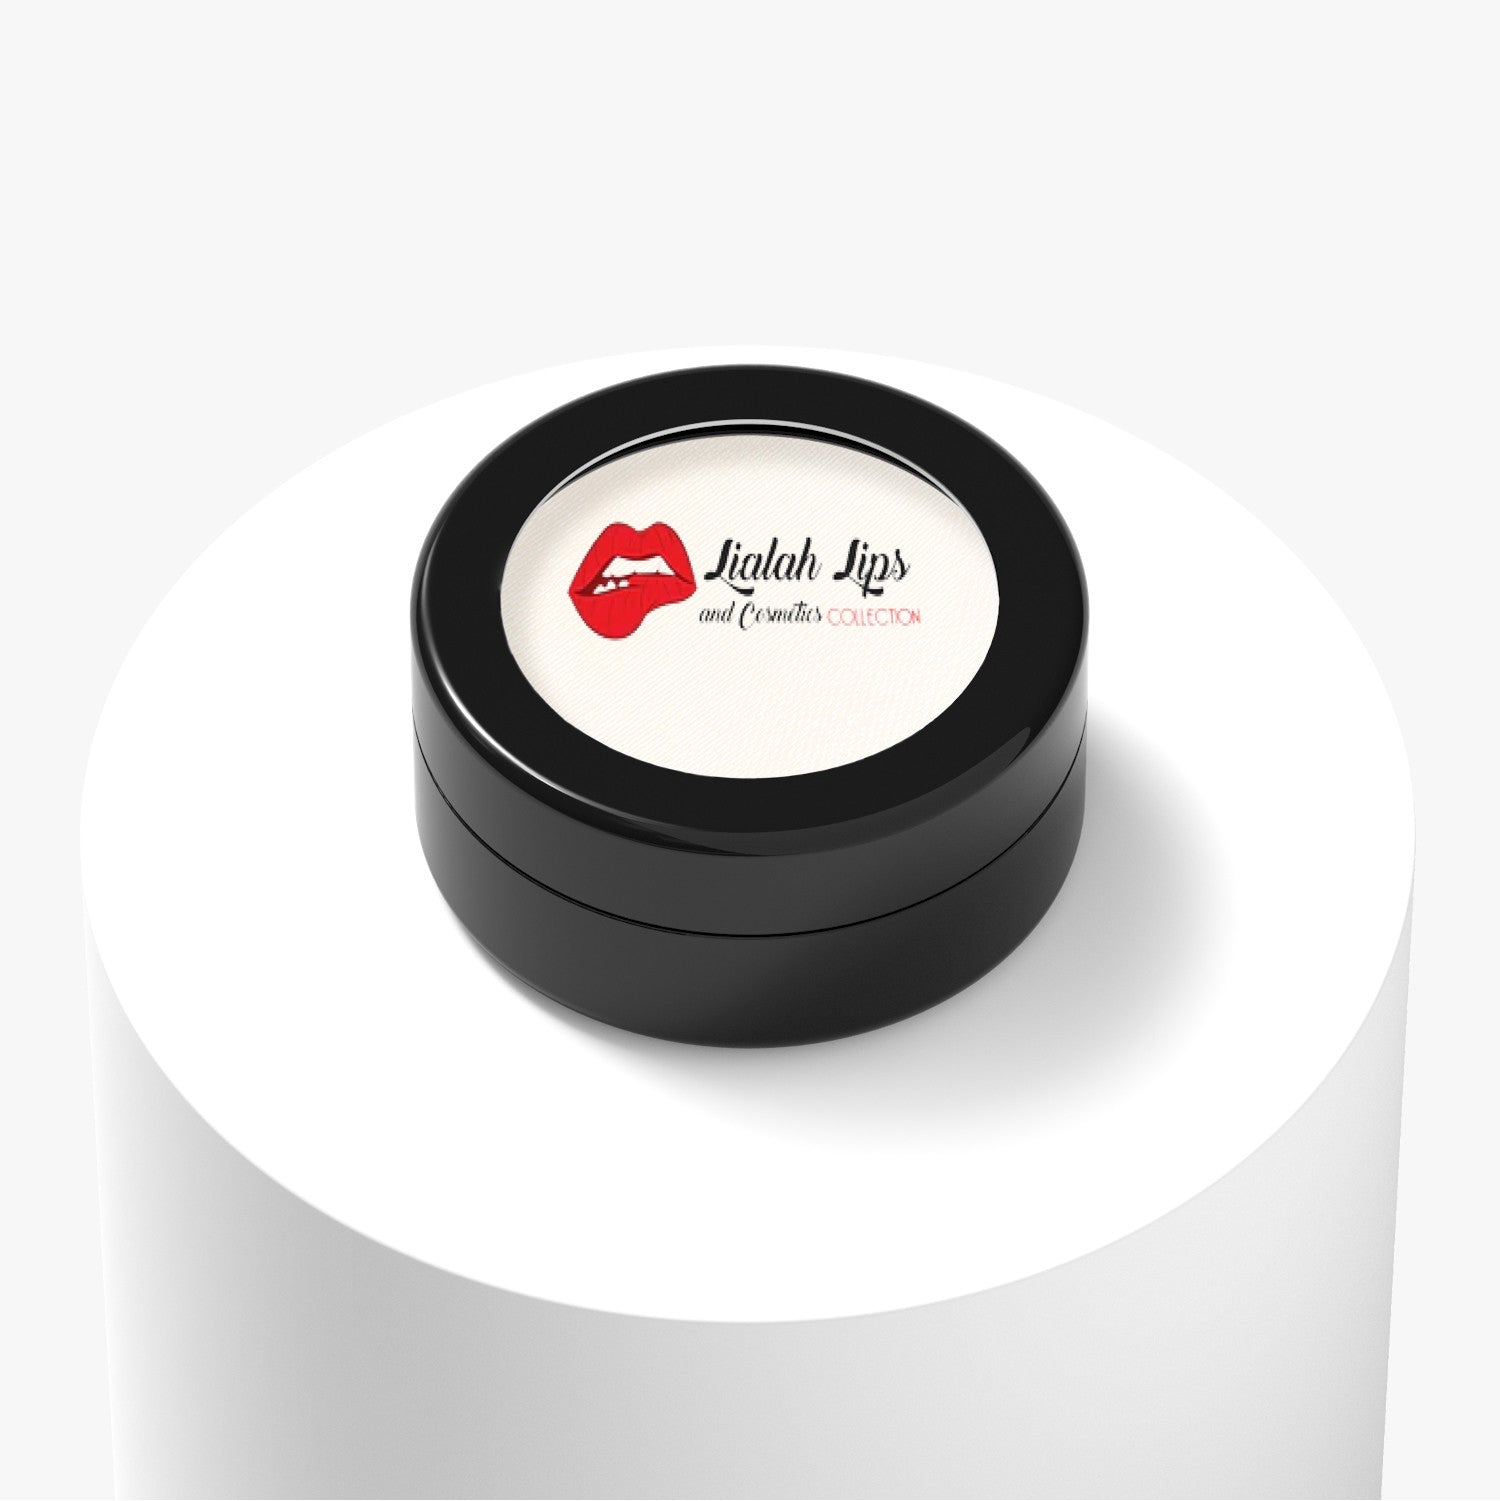 lailah-lips-and-cosmetics beauty product